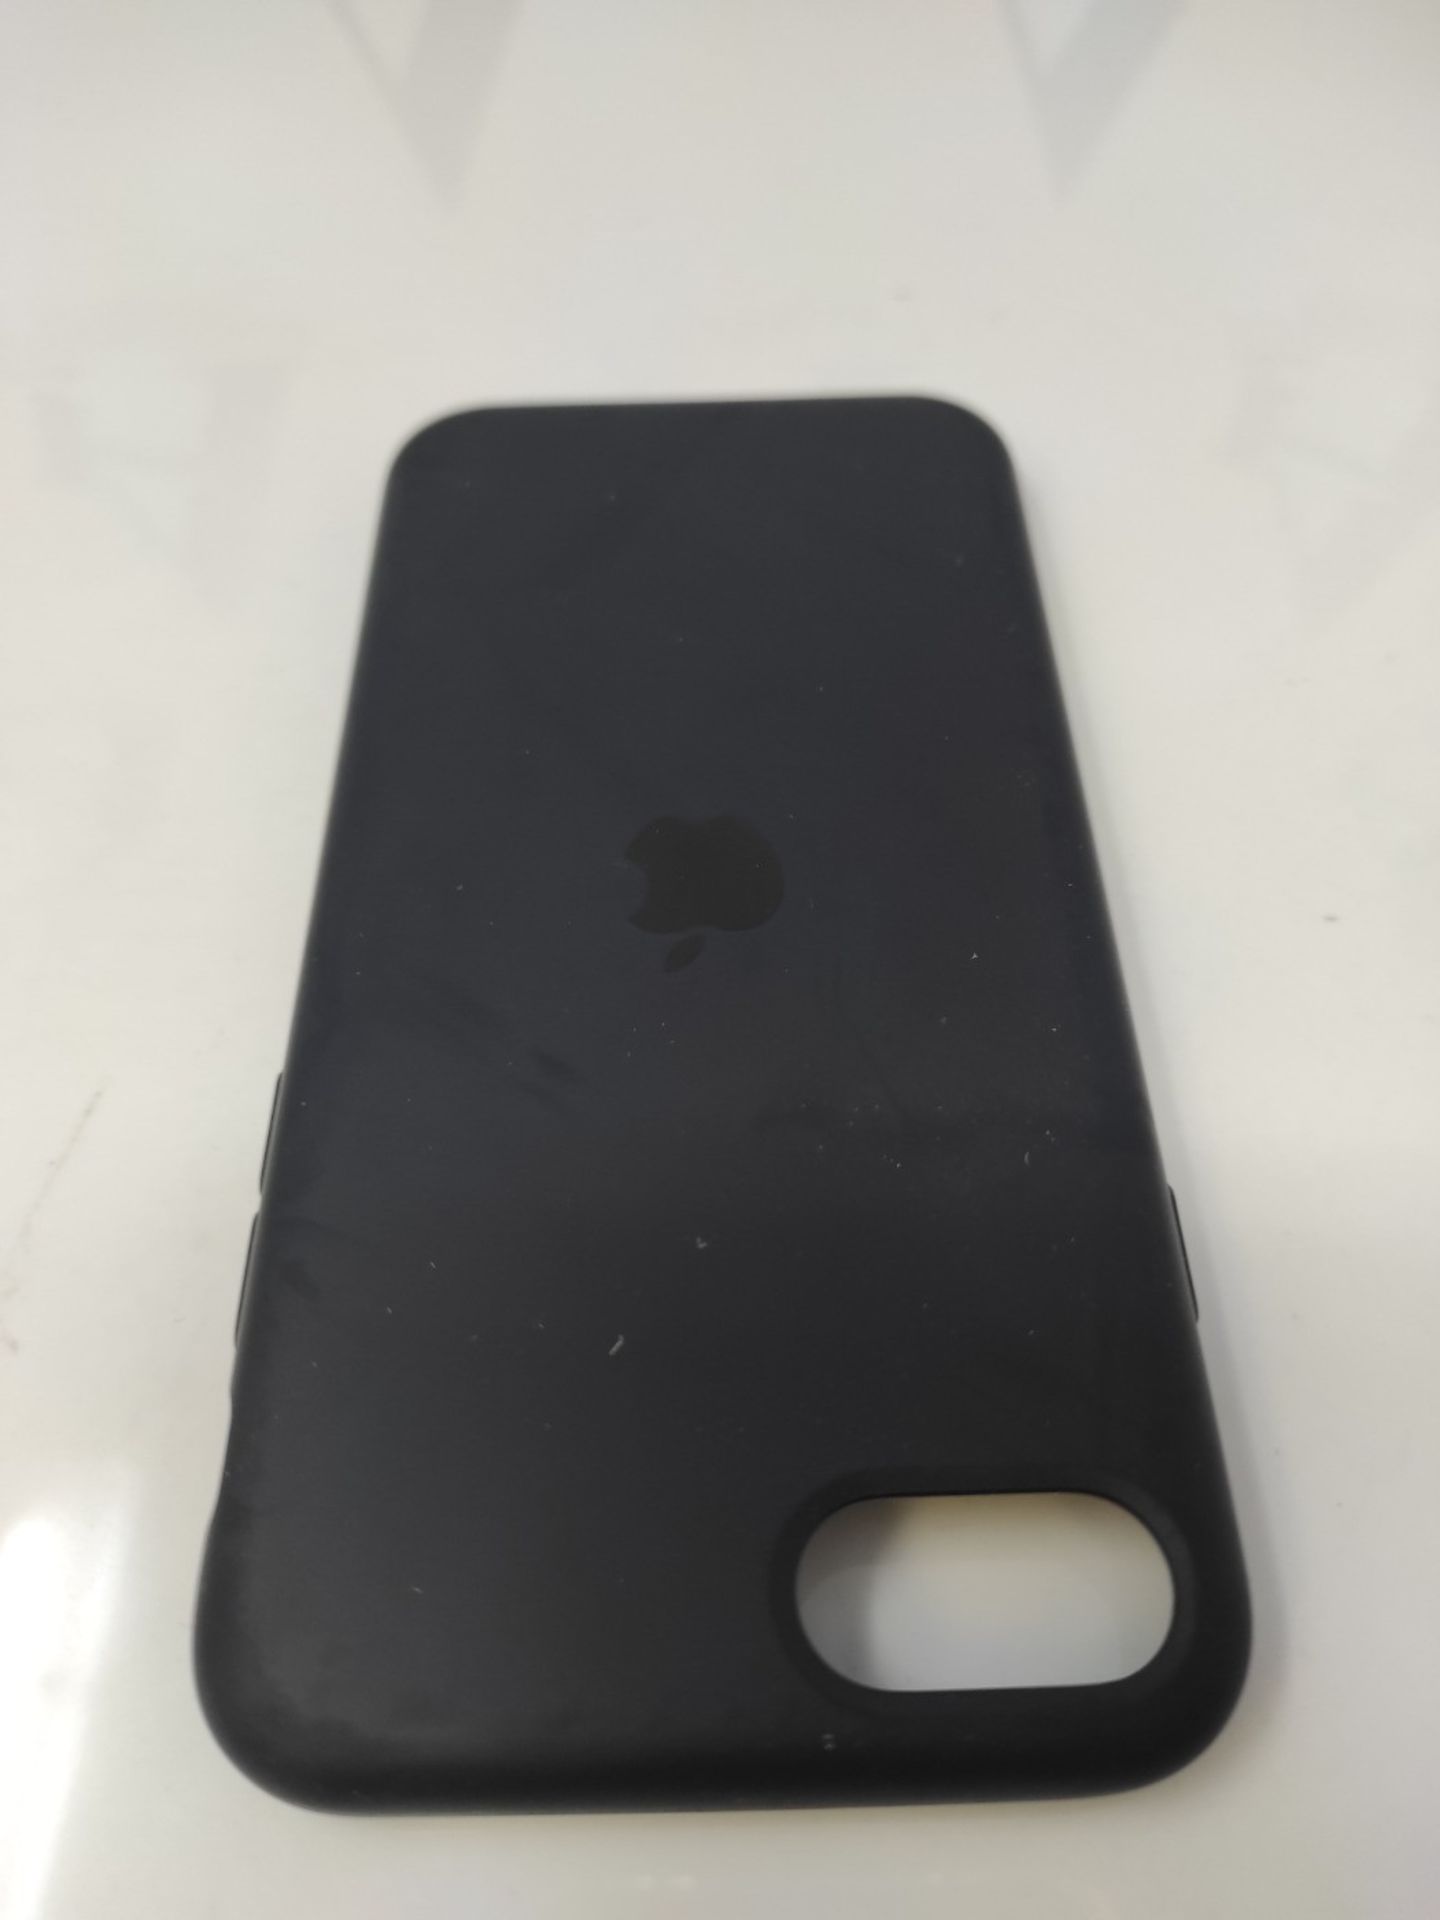 Apple Silicone Case (for iPhone SE) - Midnight - Image 2 of 2